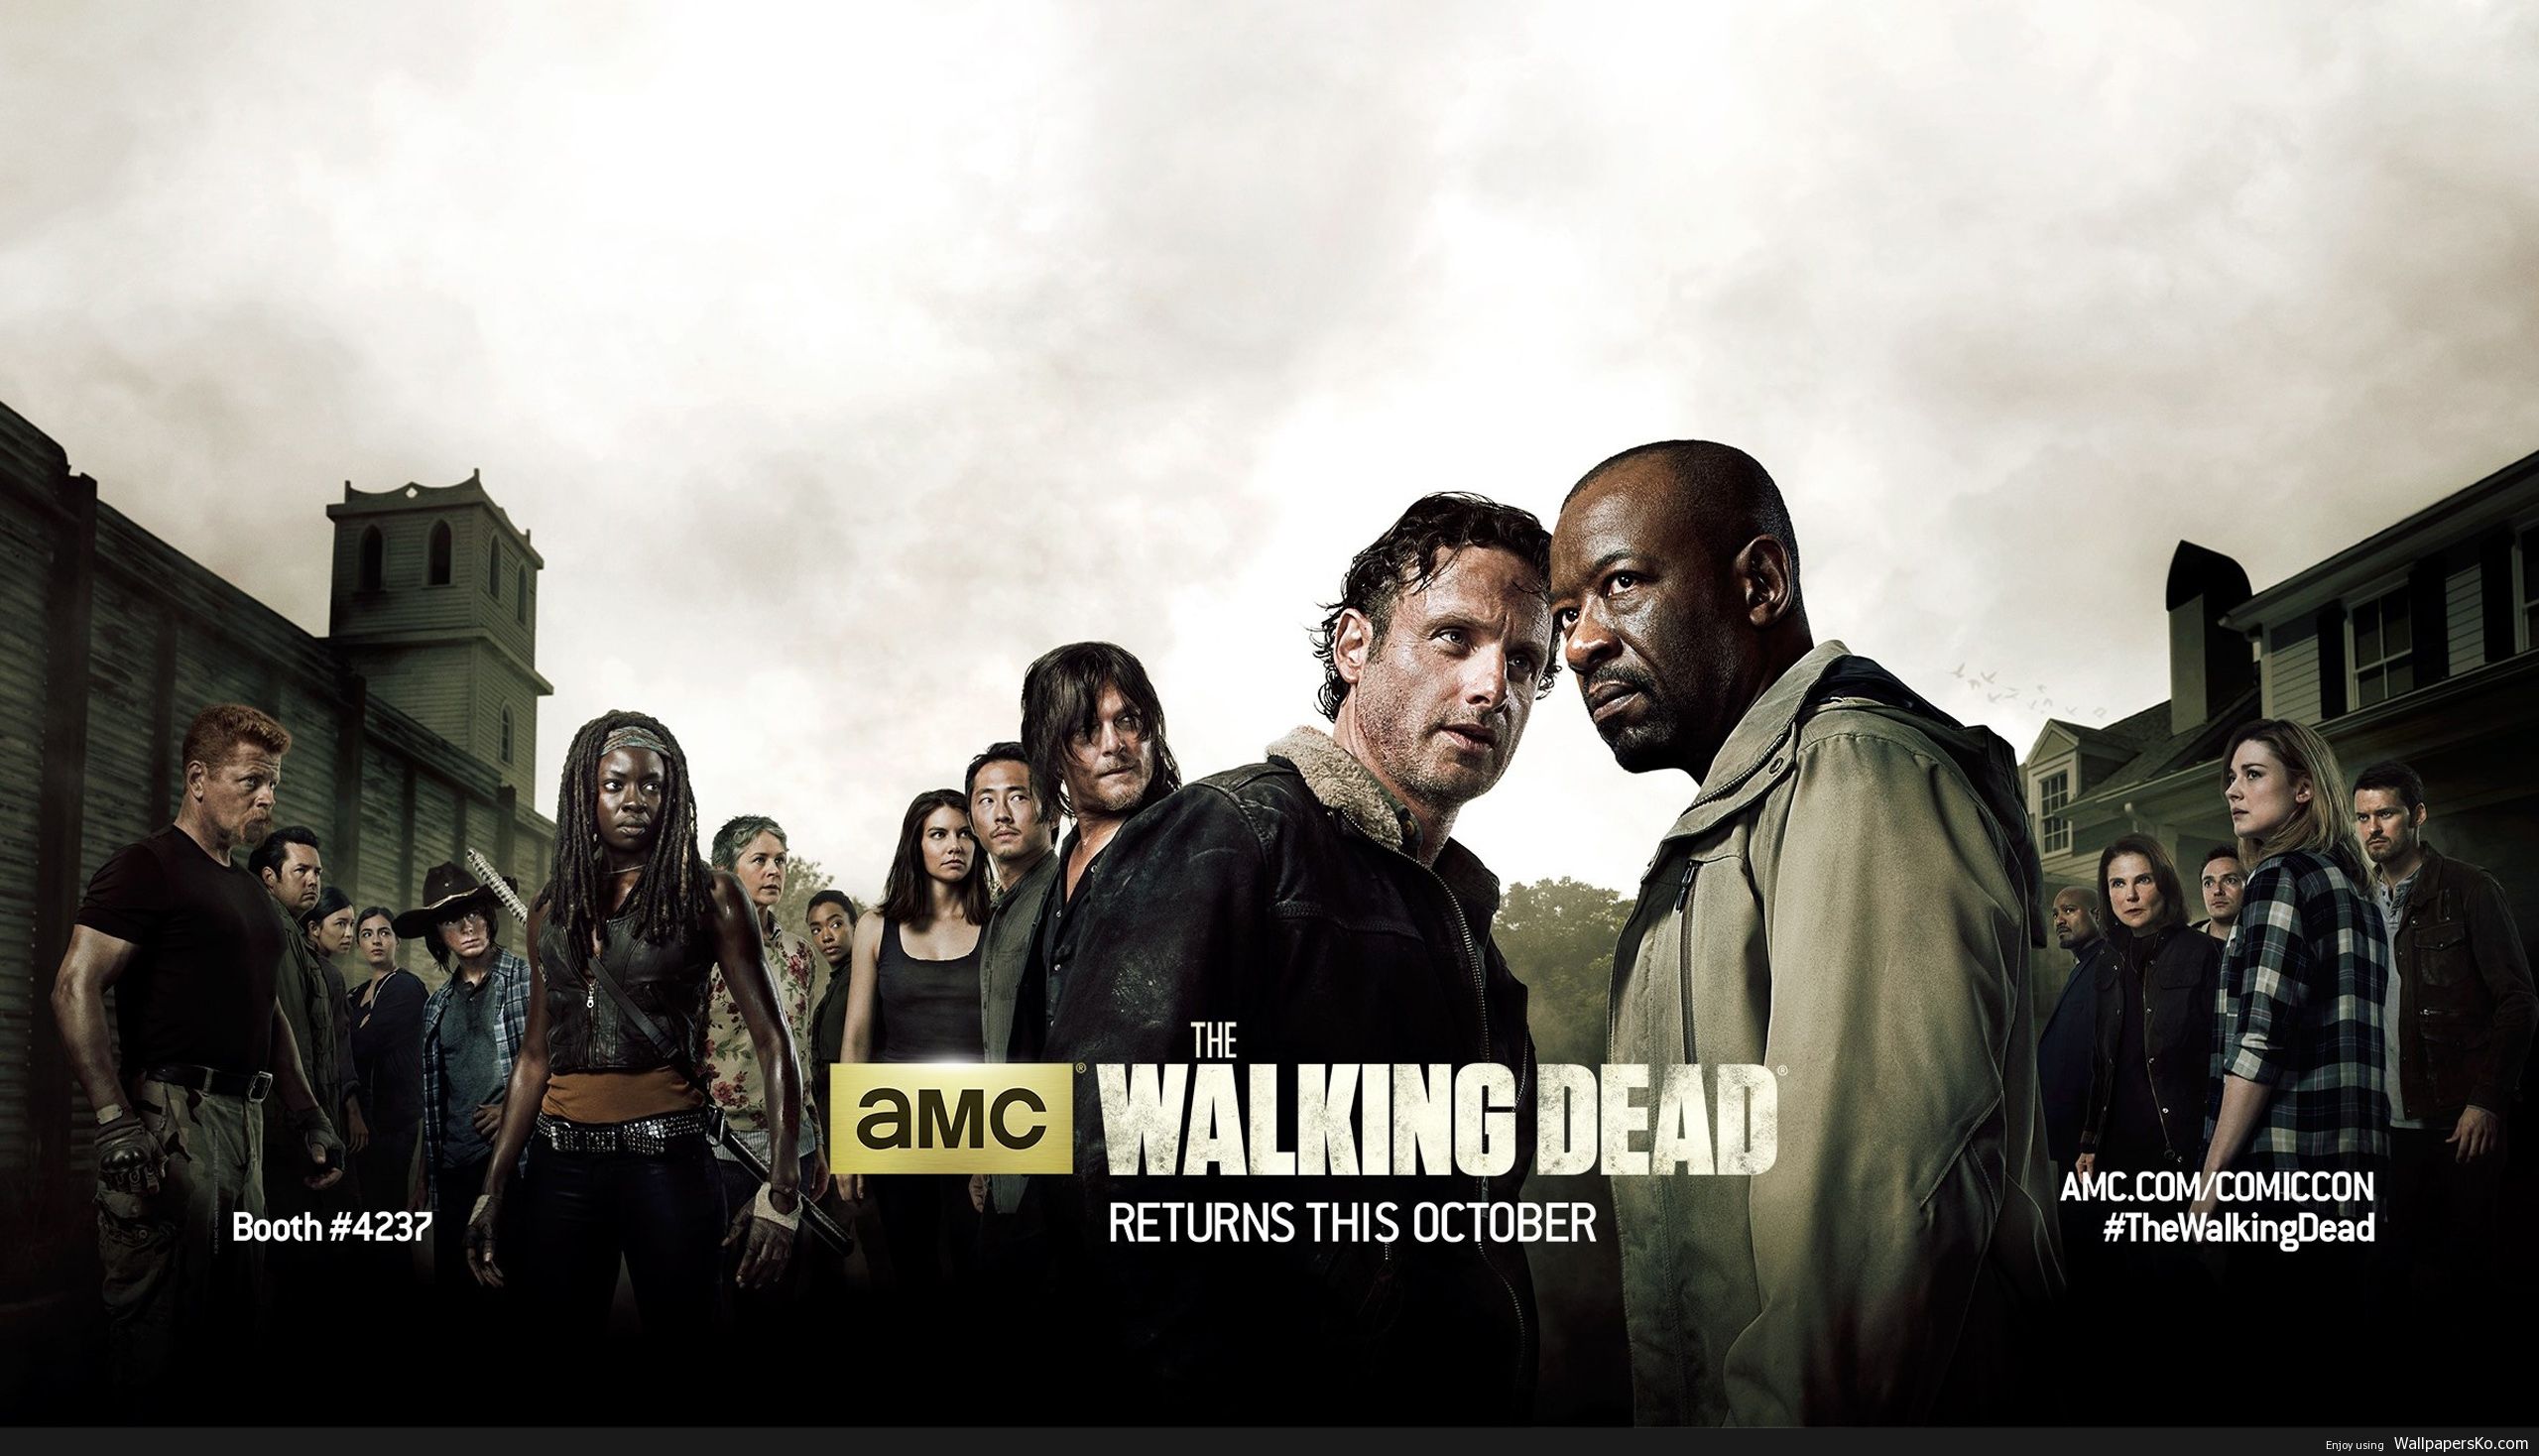 Twd Season 6 Wallpaper /twd Season 6 Wallpaper HD Wallpaper D. Walking Dead Season, Walking Dead Season The Walking Dead Poster